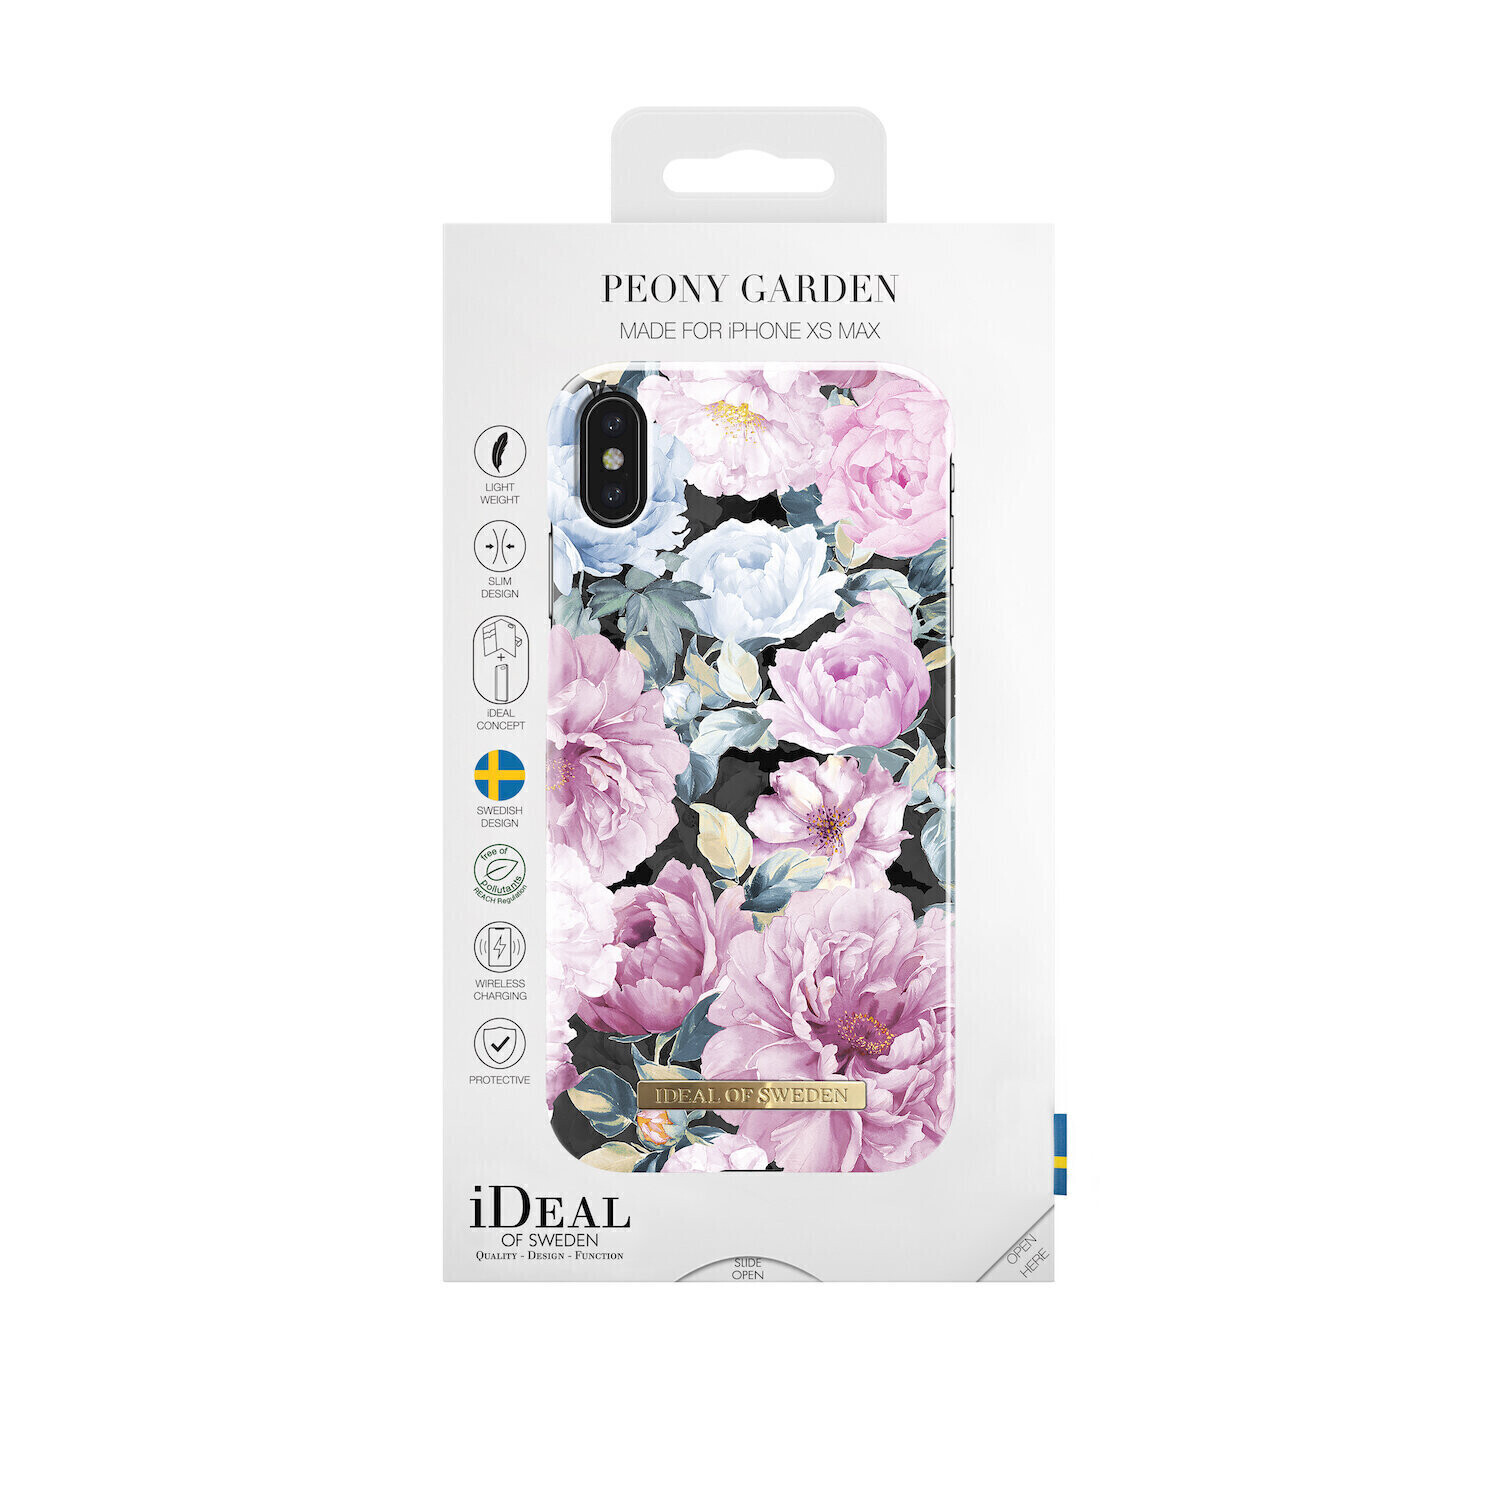 iDeal Of Sweden iPhone Xs Max Fashion Case S/S 2018, Peony Garden